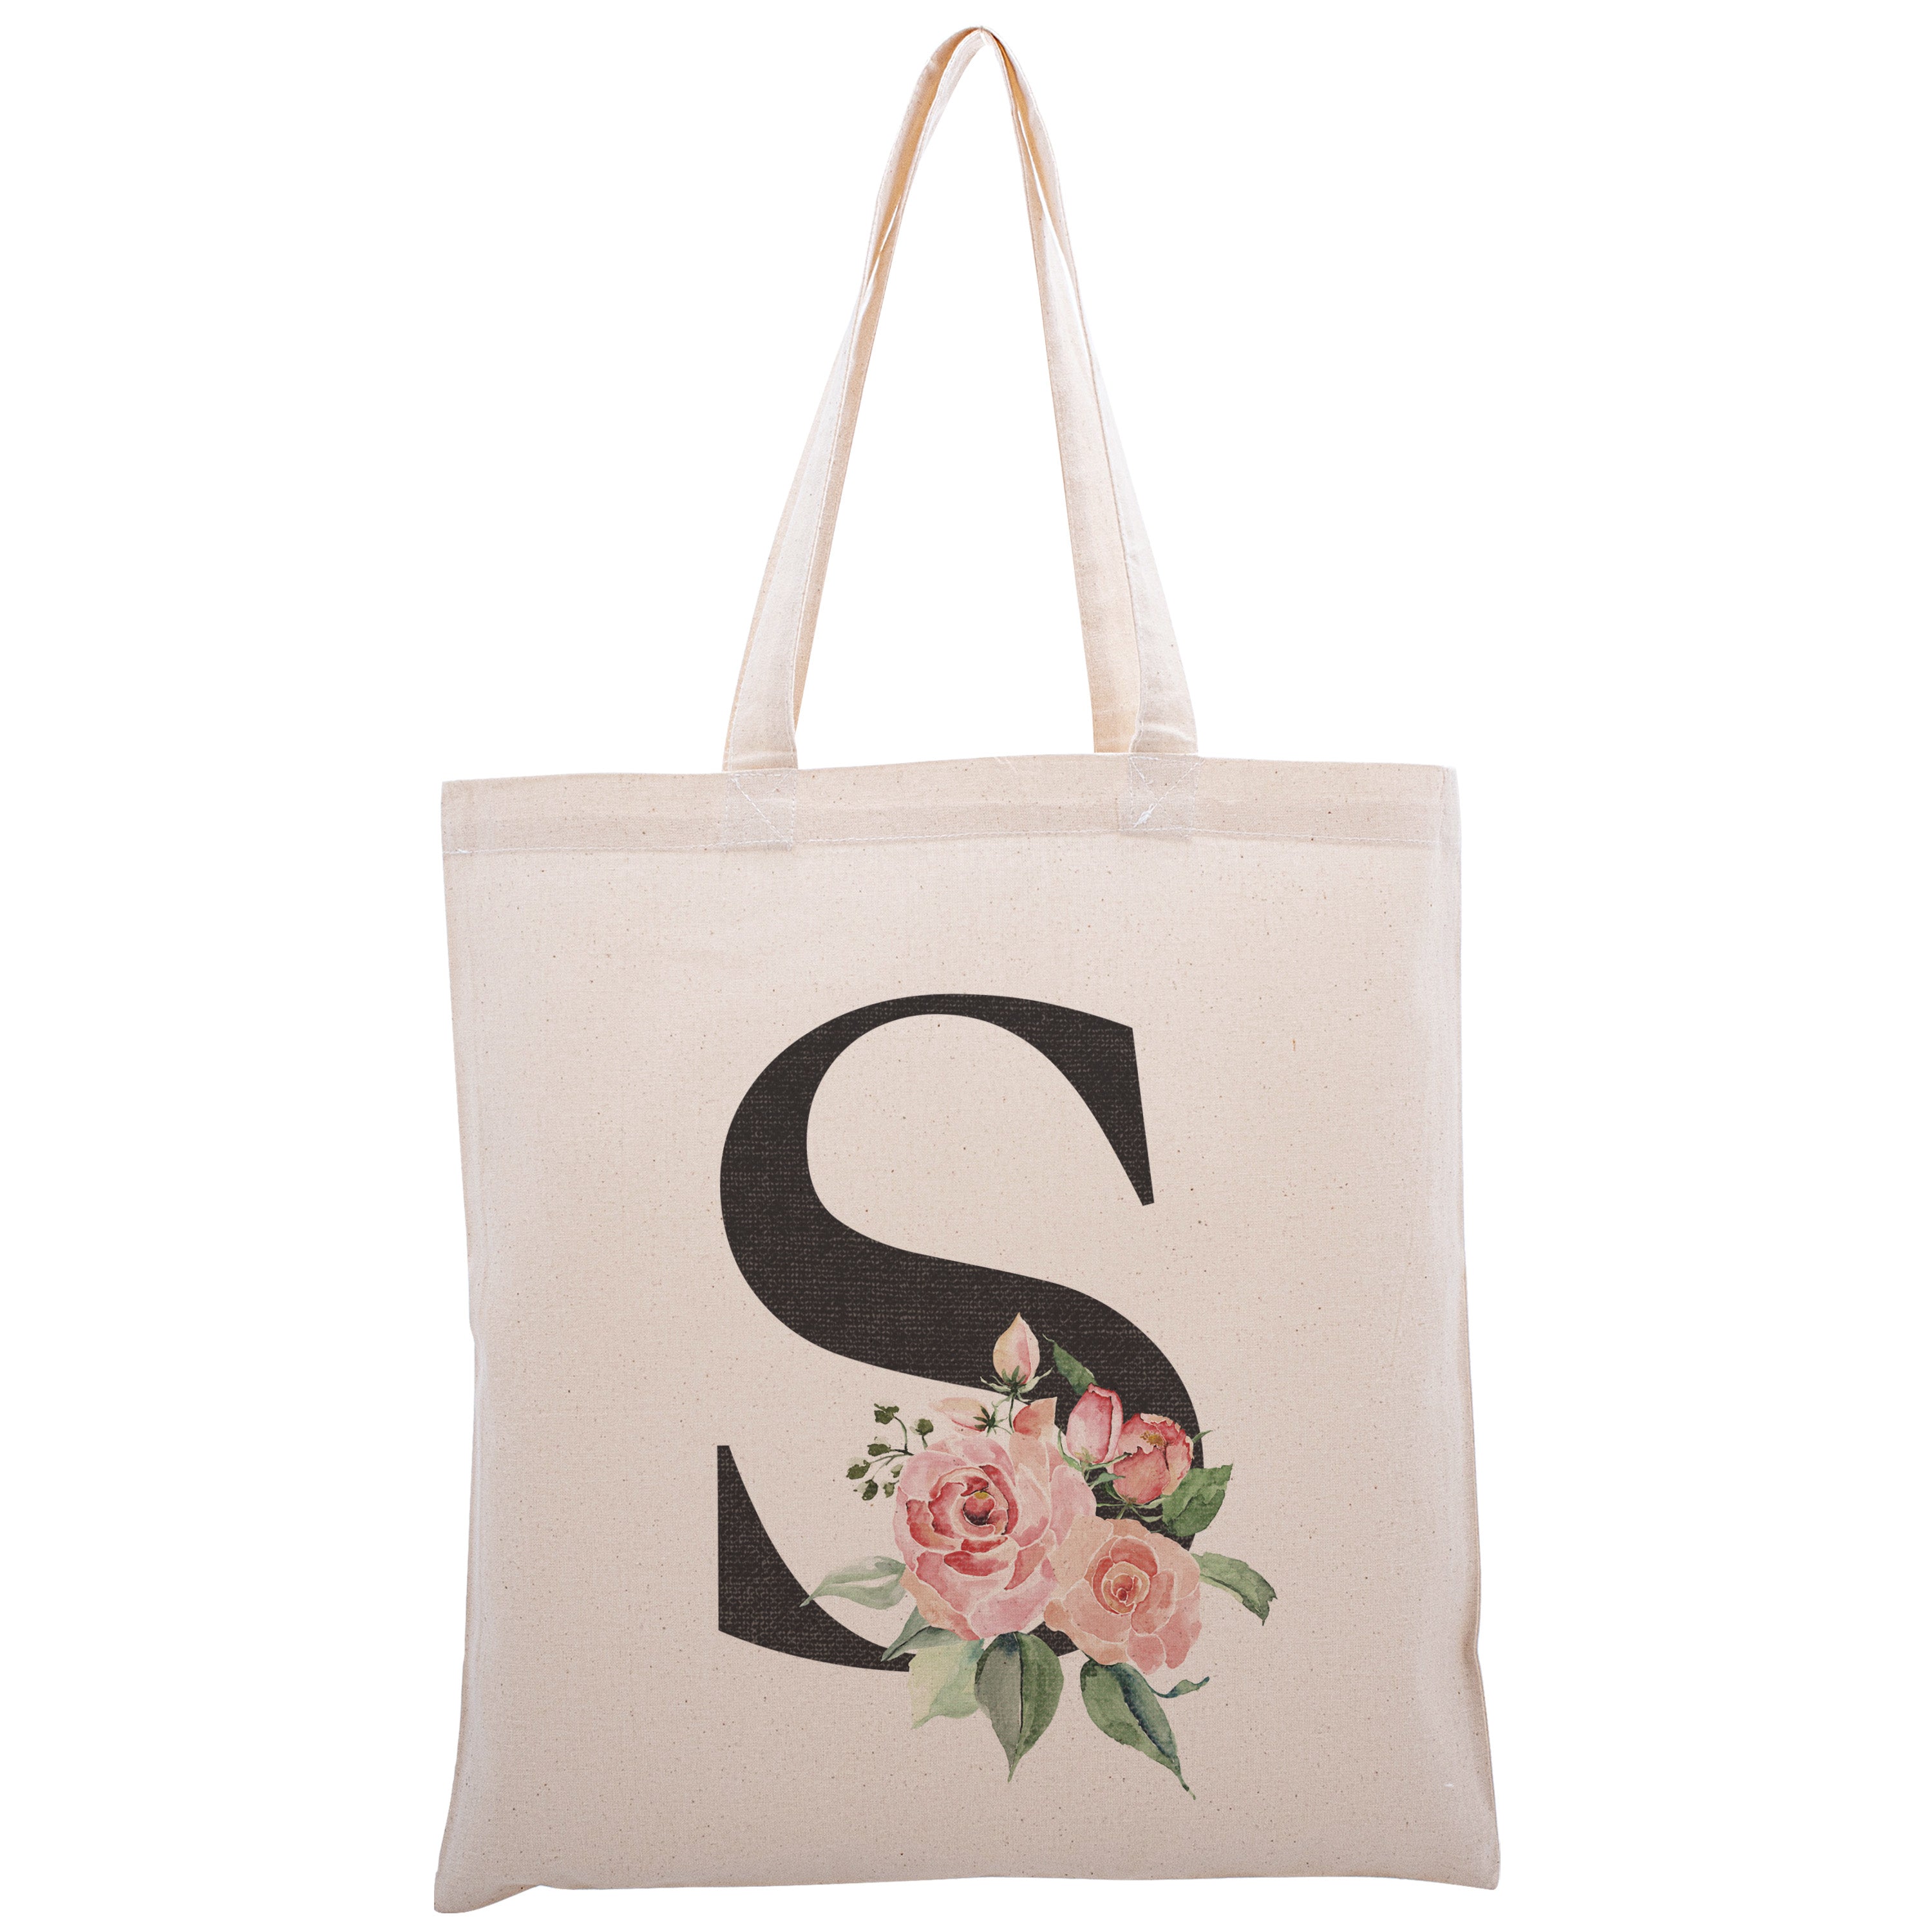 Personalized Tote Bag Floral Initial Canvas Tote Bags for Women, Monogram Bag for Bridesmaids Wedding Bachelorette Party (Letter S)